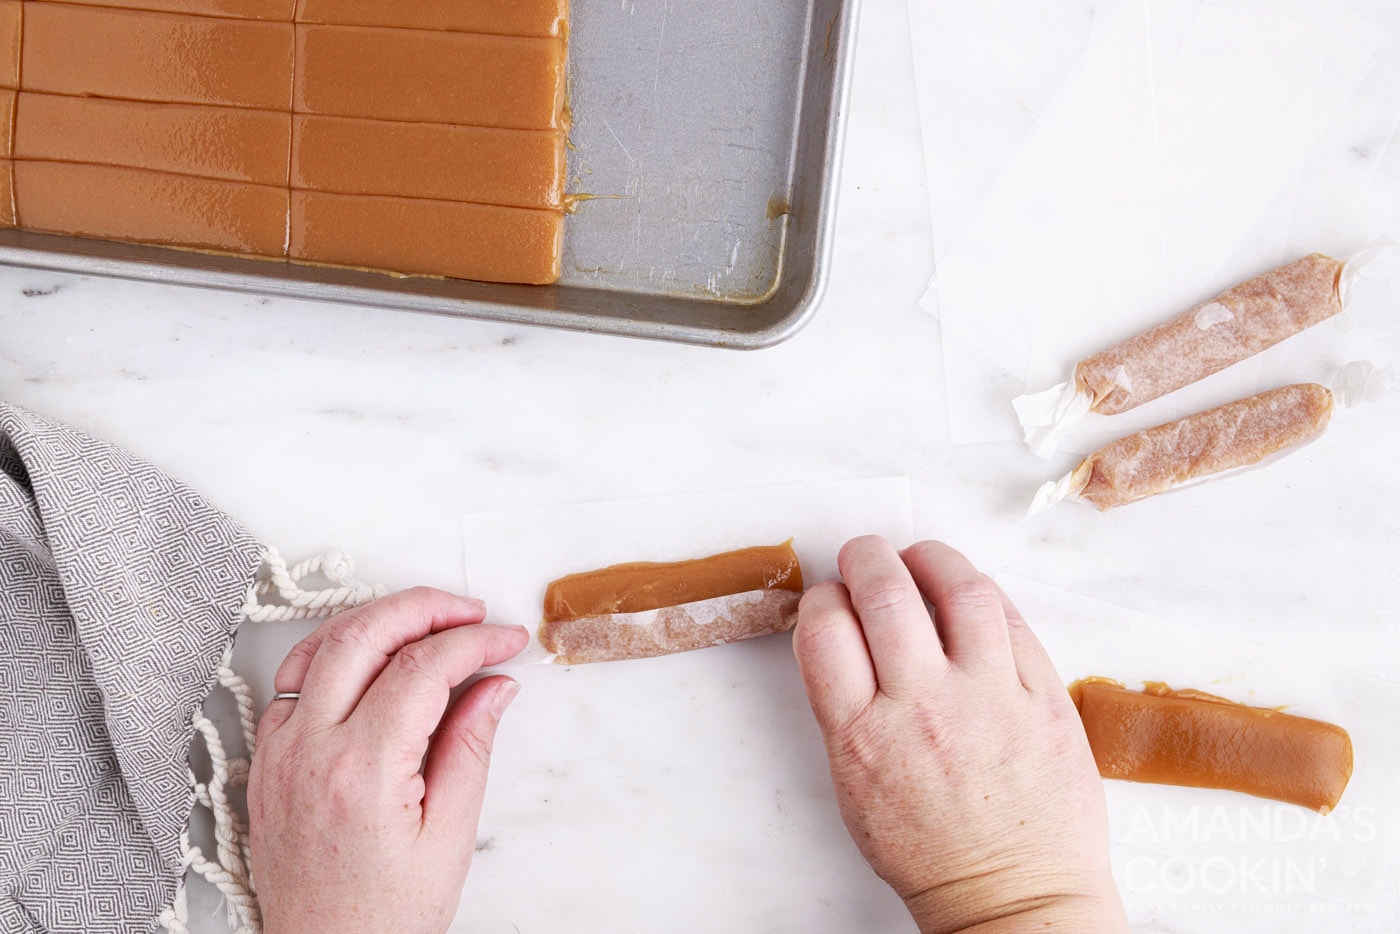 rolling caramel in parchment paper